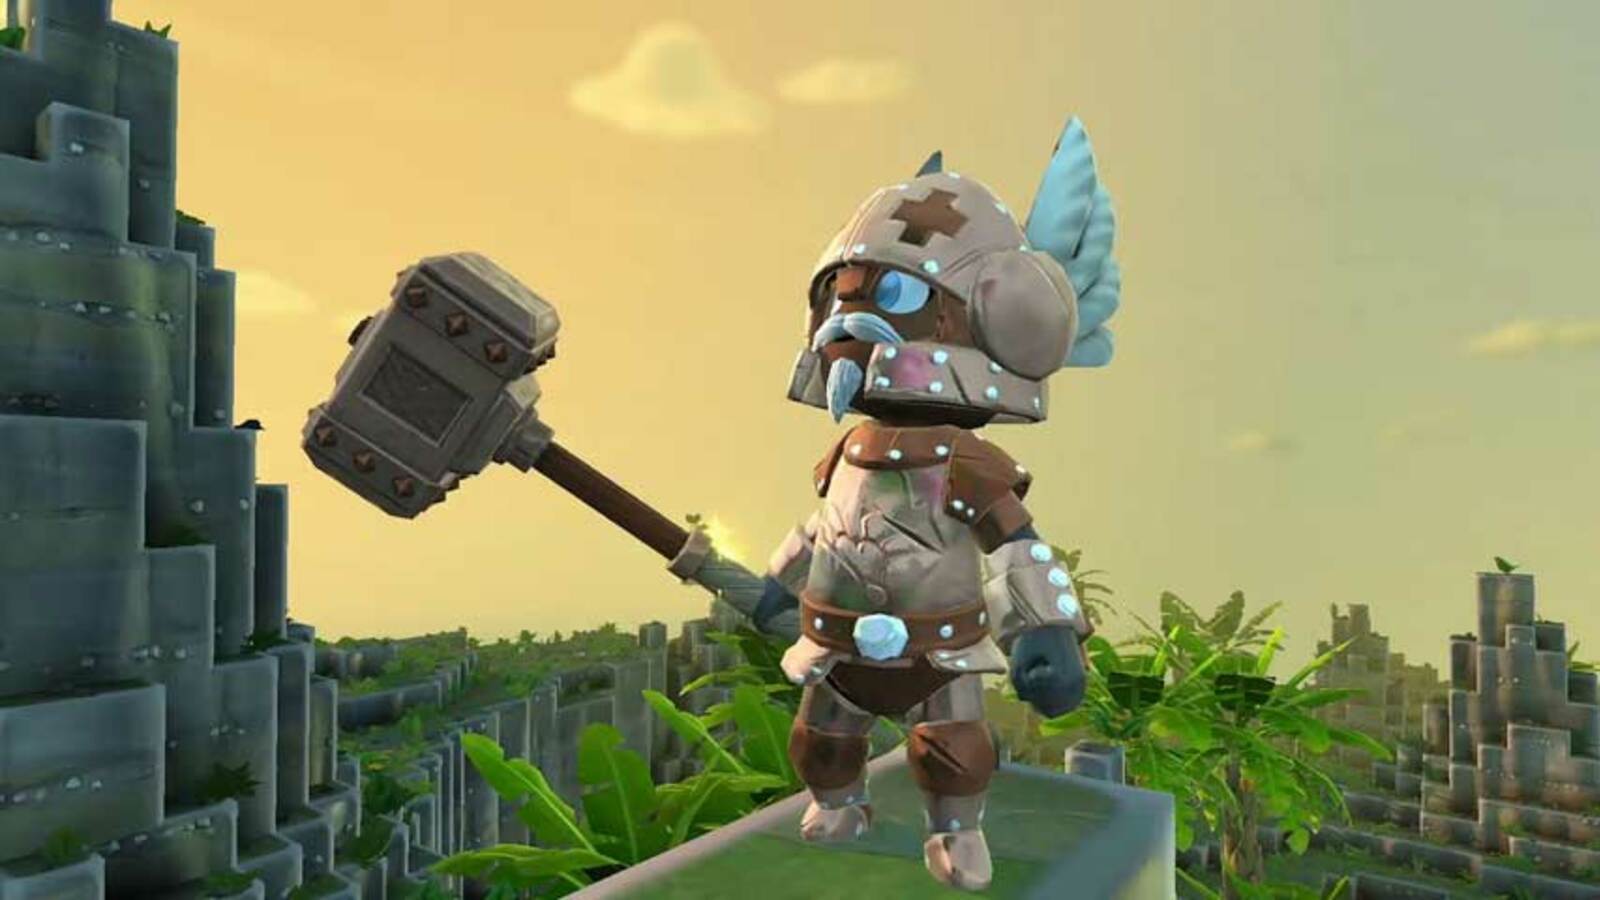 New crafting action rpg portal knights headed to steam early access later this month